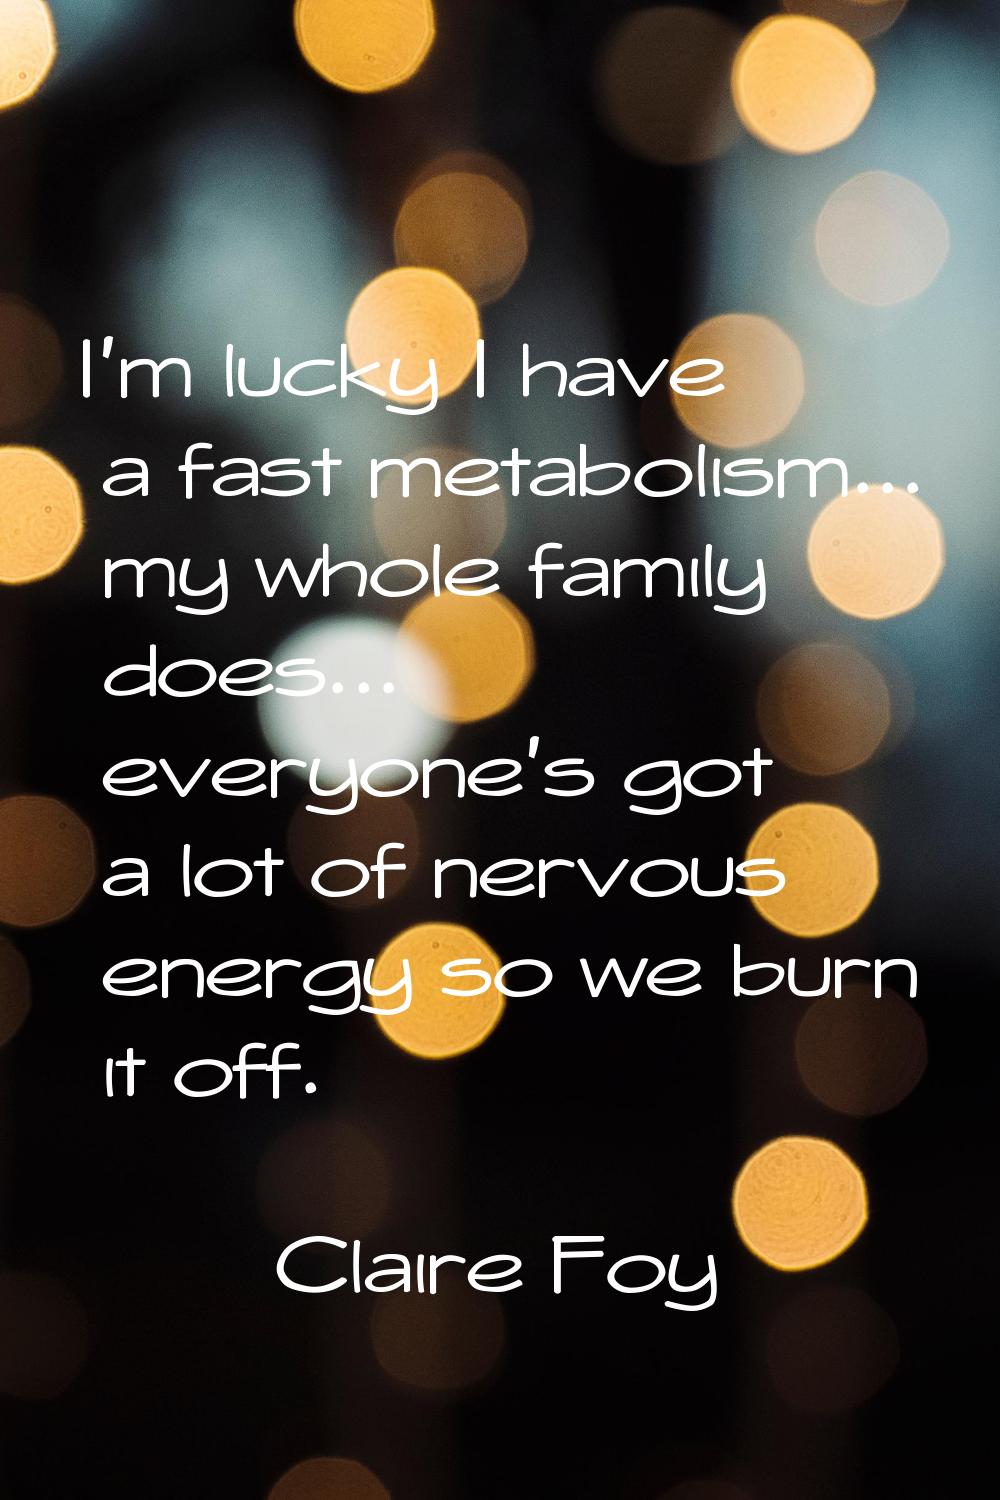 I'm lucky I have a fast metabolism... my whole family does... everyone's got a lot of nervous energ